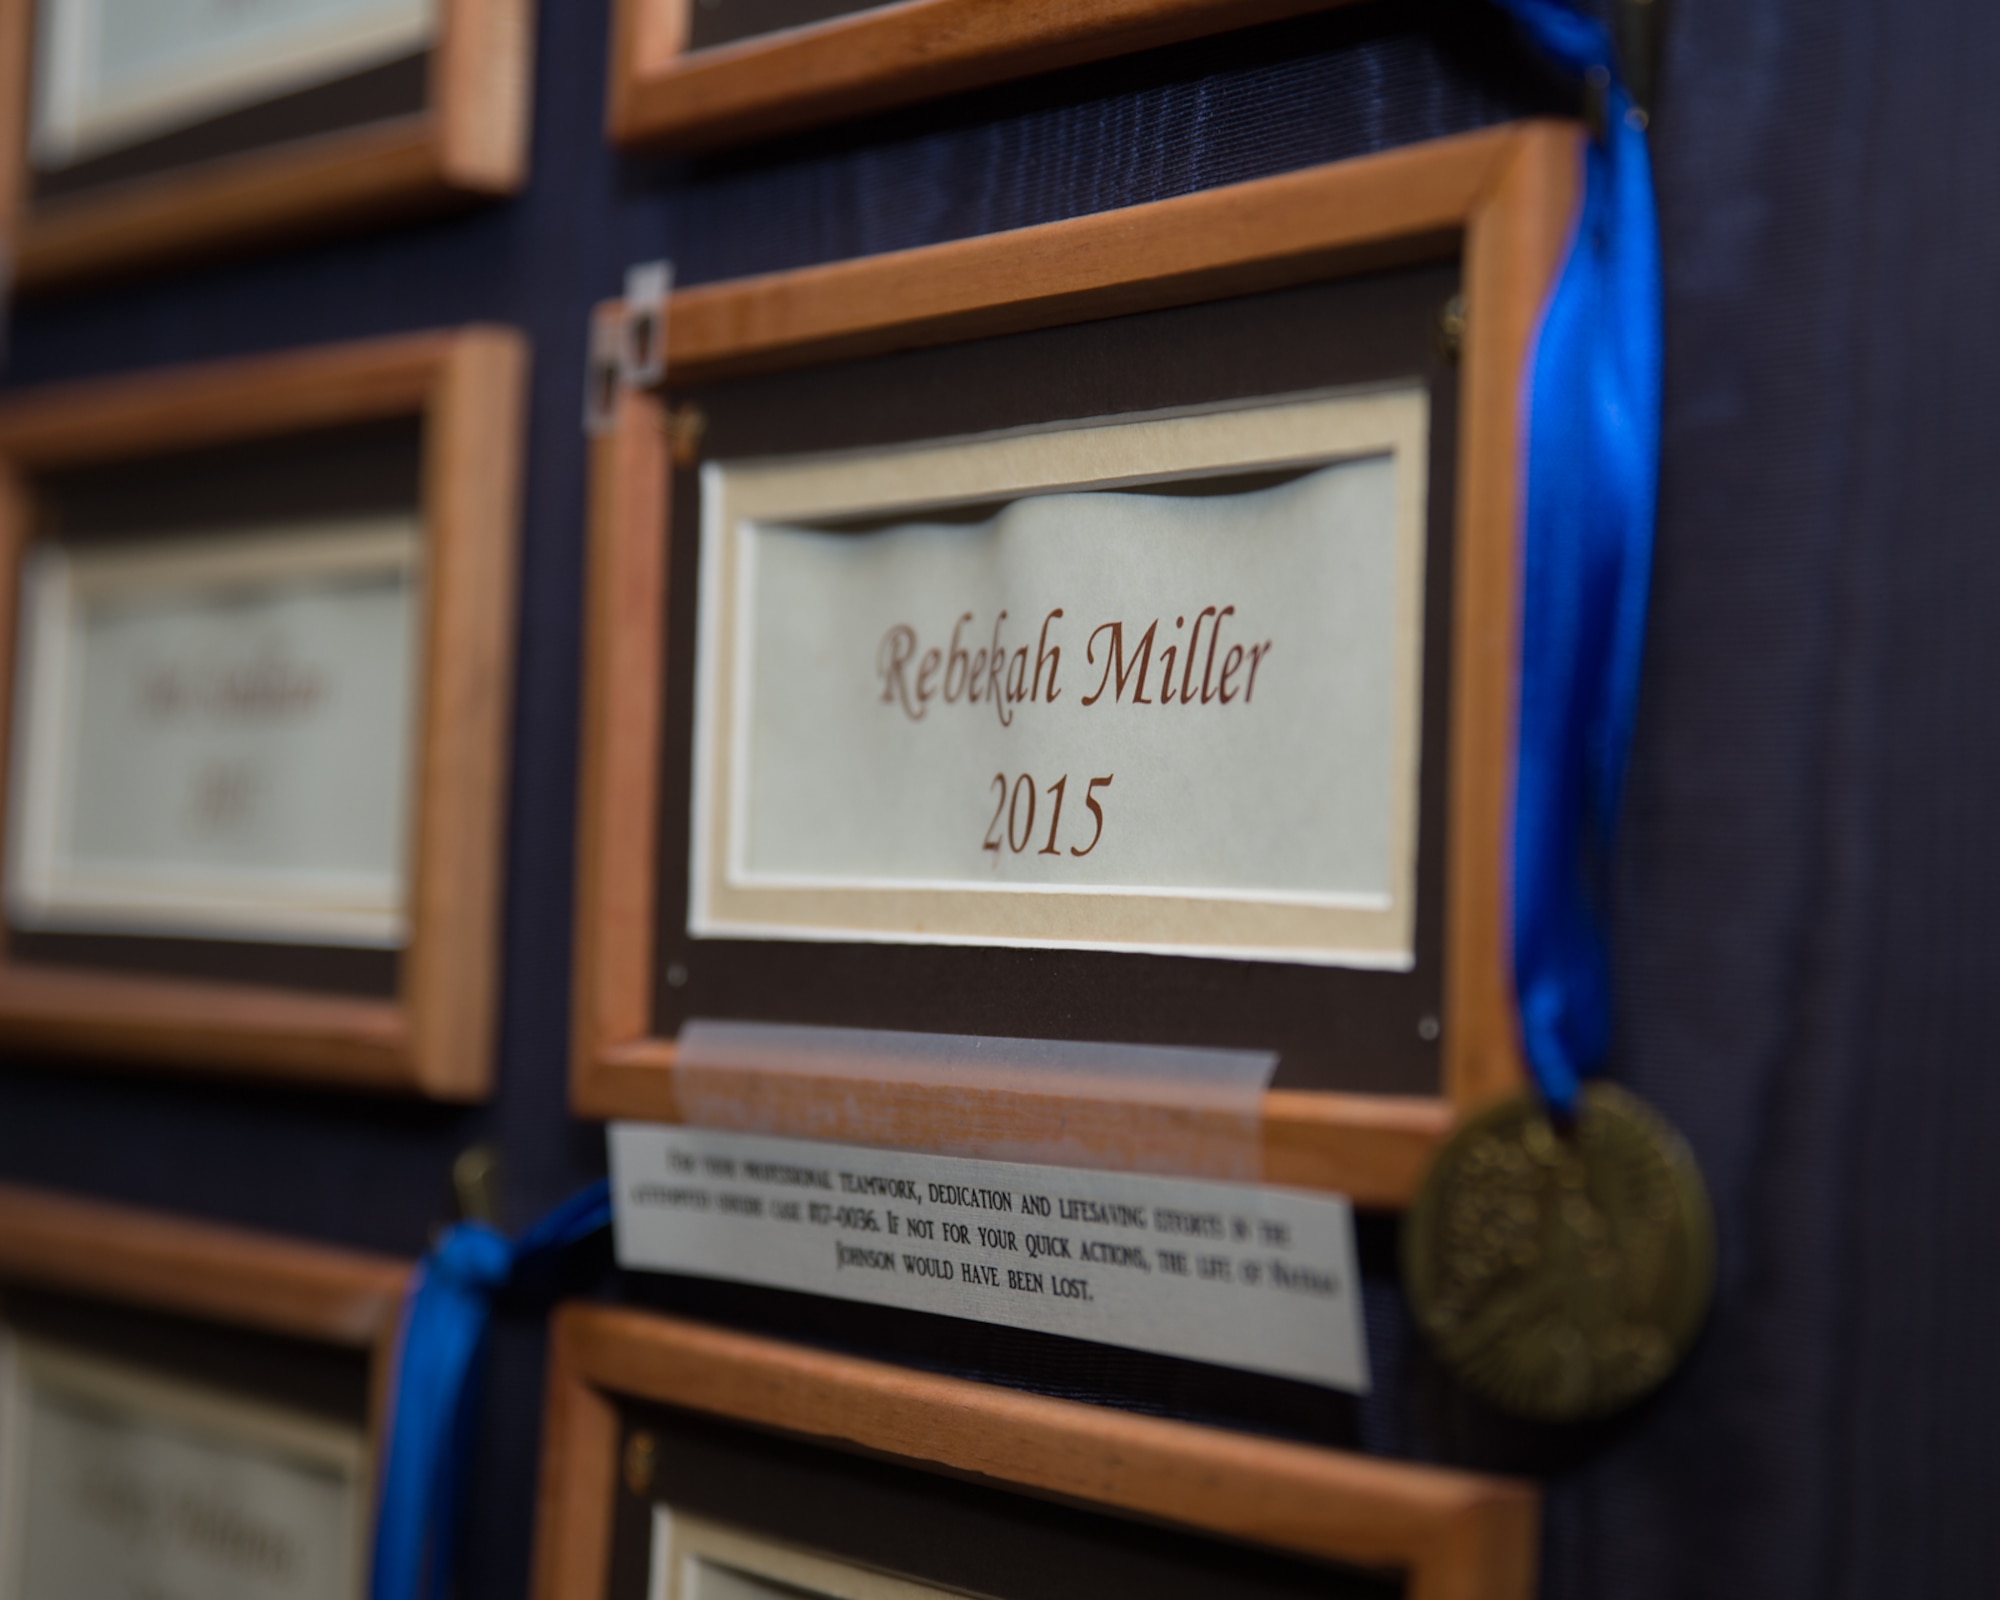 A blue ribbon is draped across a wooden frame surrounding the name Rebekah Miller which is on a board in the Torrington police department, Mar. 10, 2017 in Torrington, Wyoming. Staff Sgt. Rebekah Miller is a member of the Wyoming Air National Guard and has for served six years. She is currently assigned as a command post specialist with the 153rd Airlift Wing. Miller has also been an officer with the Torrington police department for two years. (U.S. Air National Guard photo by Senior Master Sgt. Charles Delano/released)